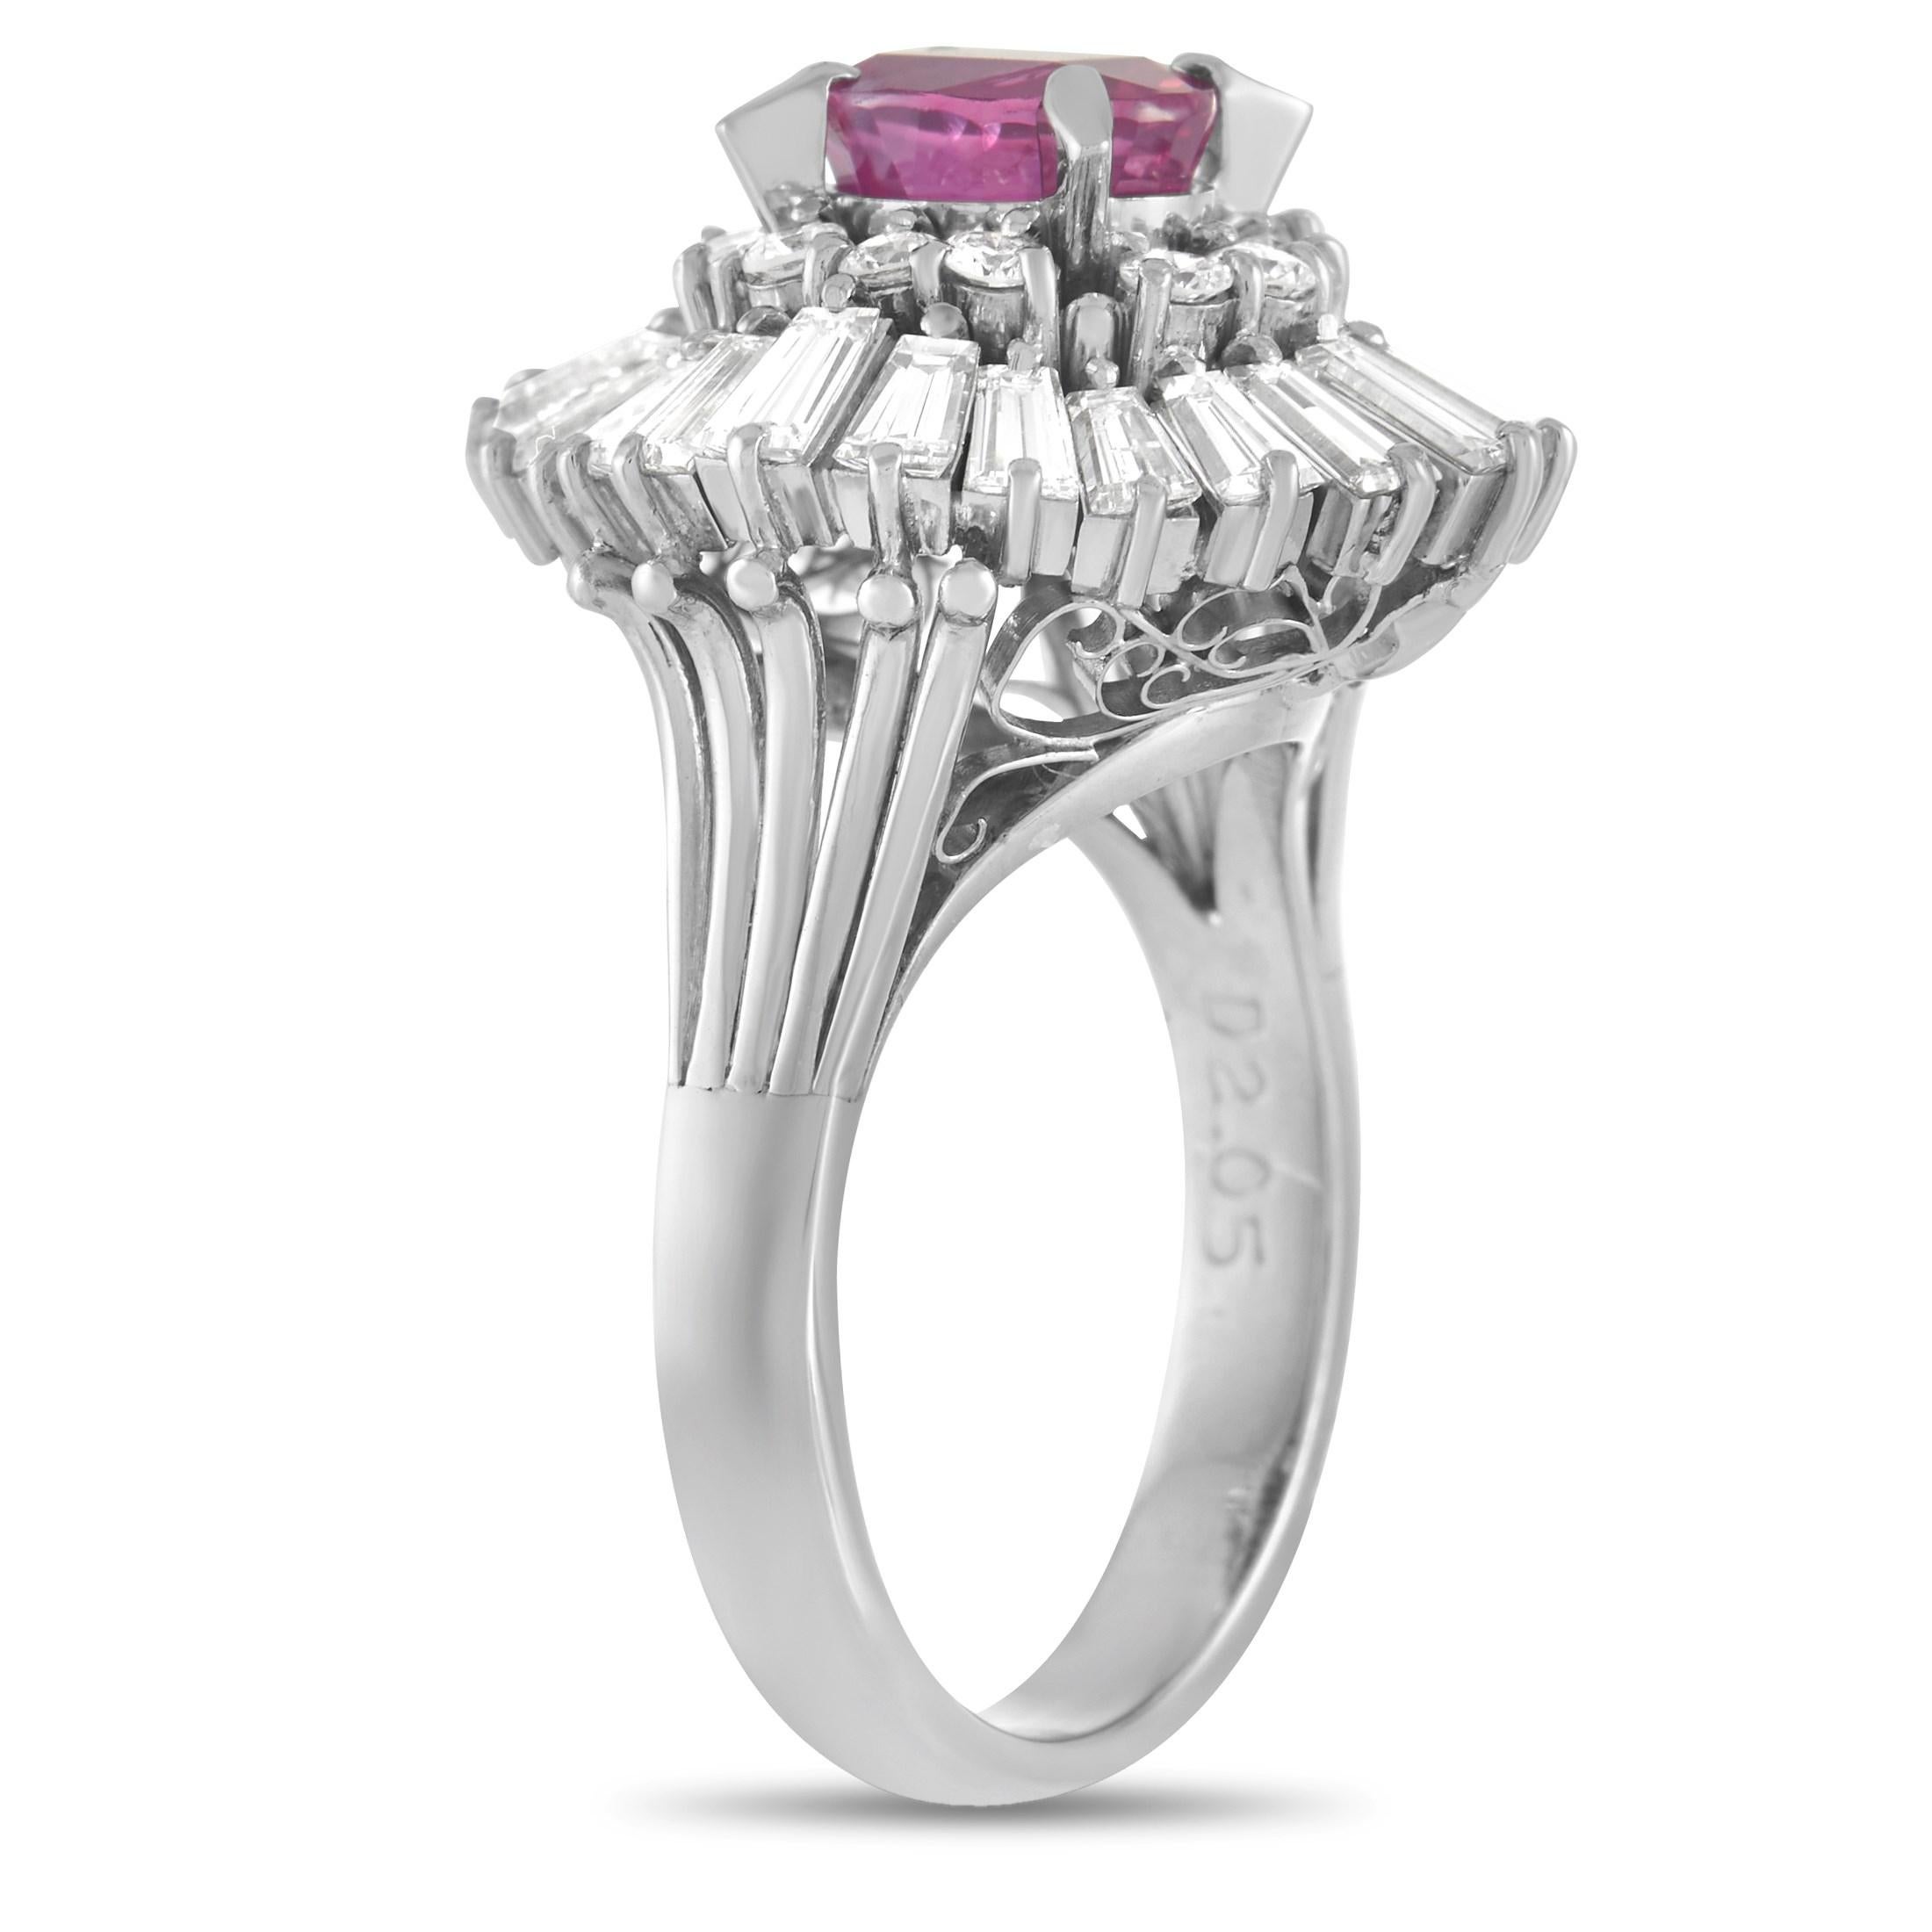 This classic LB Exclusive ring will never go out of style. The band is made with platinum and set with a 2.05 carat halo of round and baguette-cut diamonds. The face of the ring is set with a 1.30 carat oval cut pink sapphire center stone held in